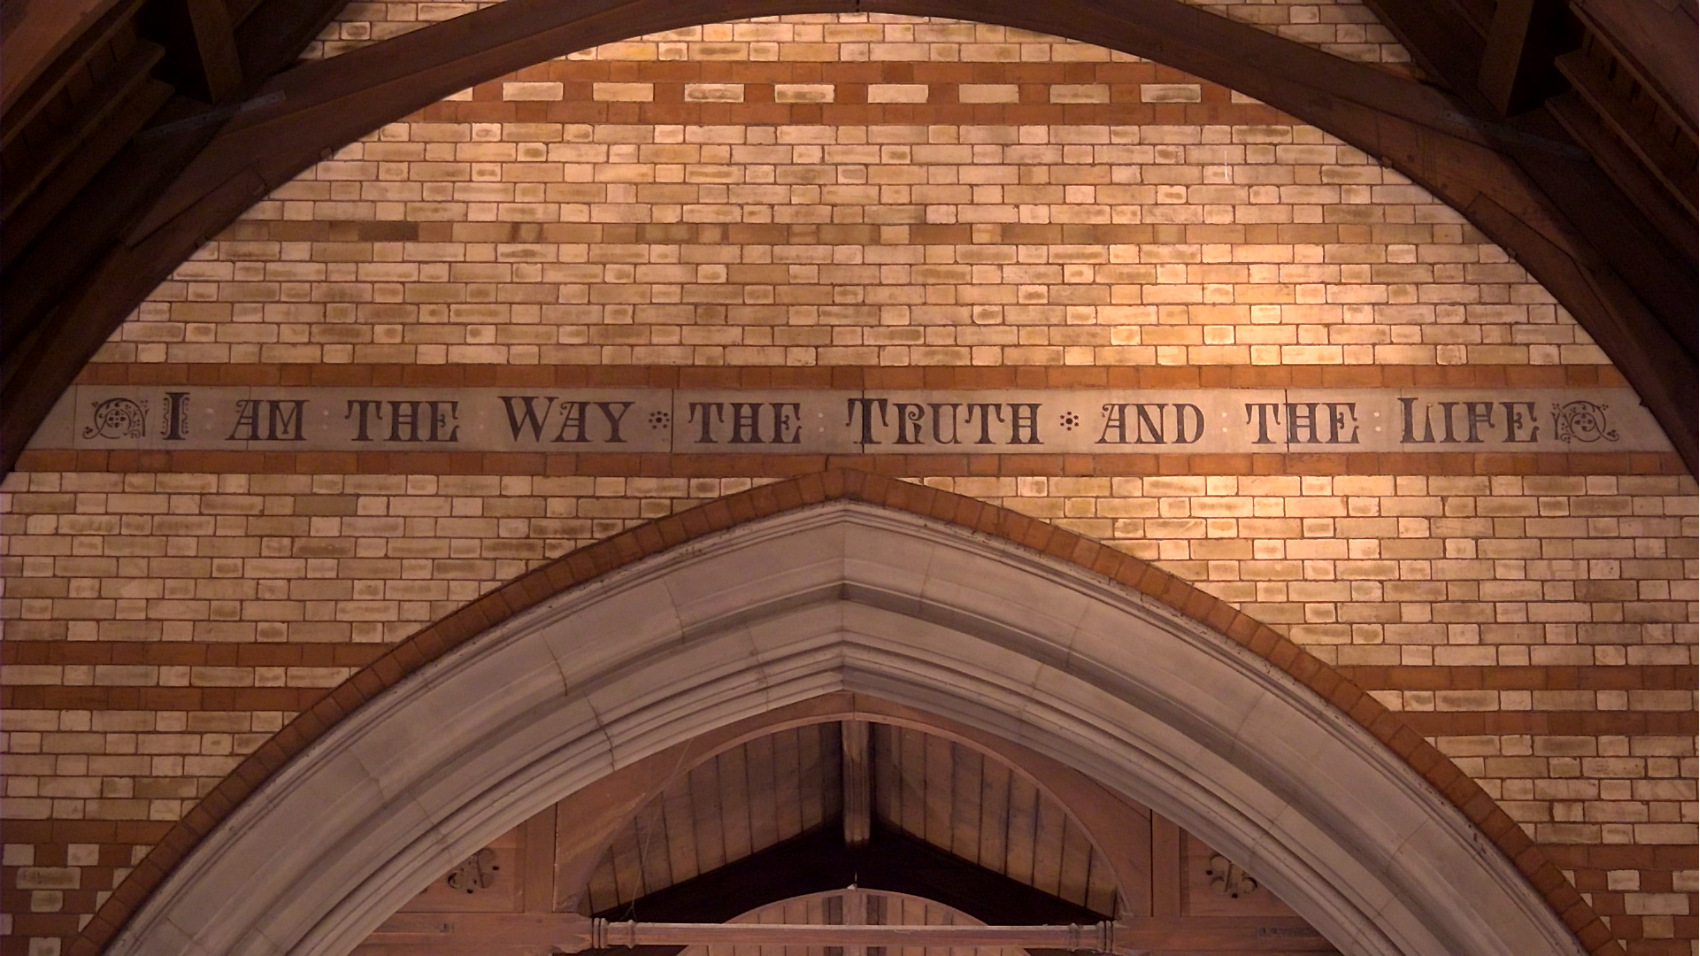 I am the Way the Truth and the Life written on bricks at the top of an arch